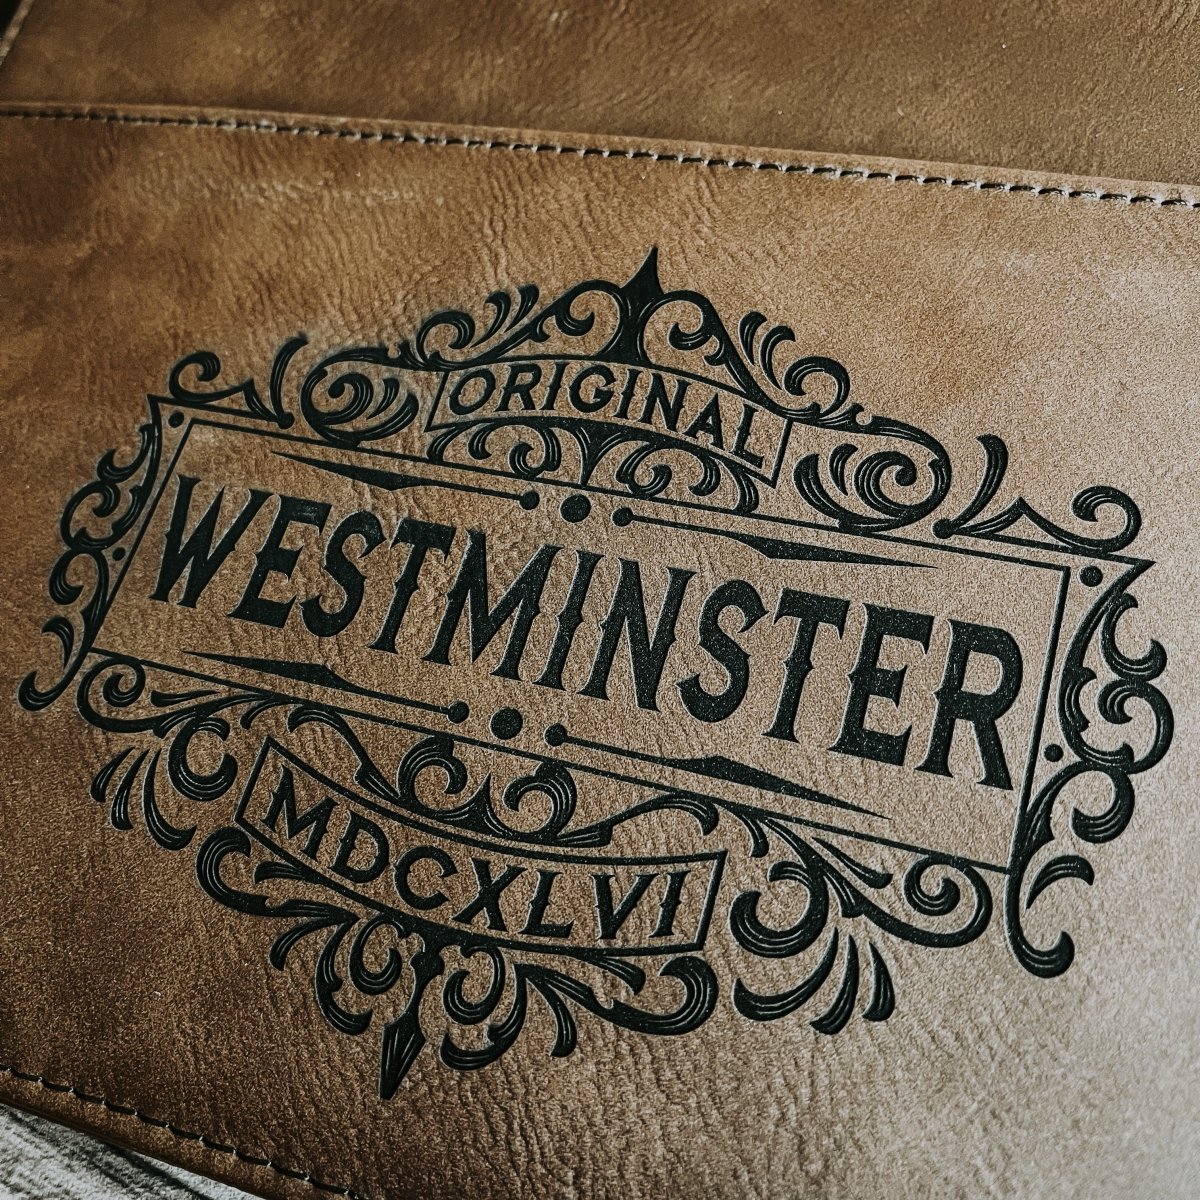 Bible Cover - Westminster MDCXLVI - The Reformed Sage - #reformed# - #reformed_gifts# - #christian_gifts#